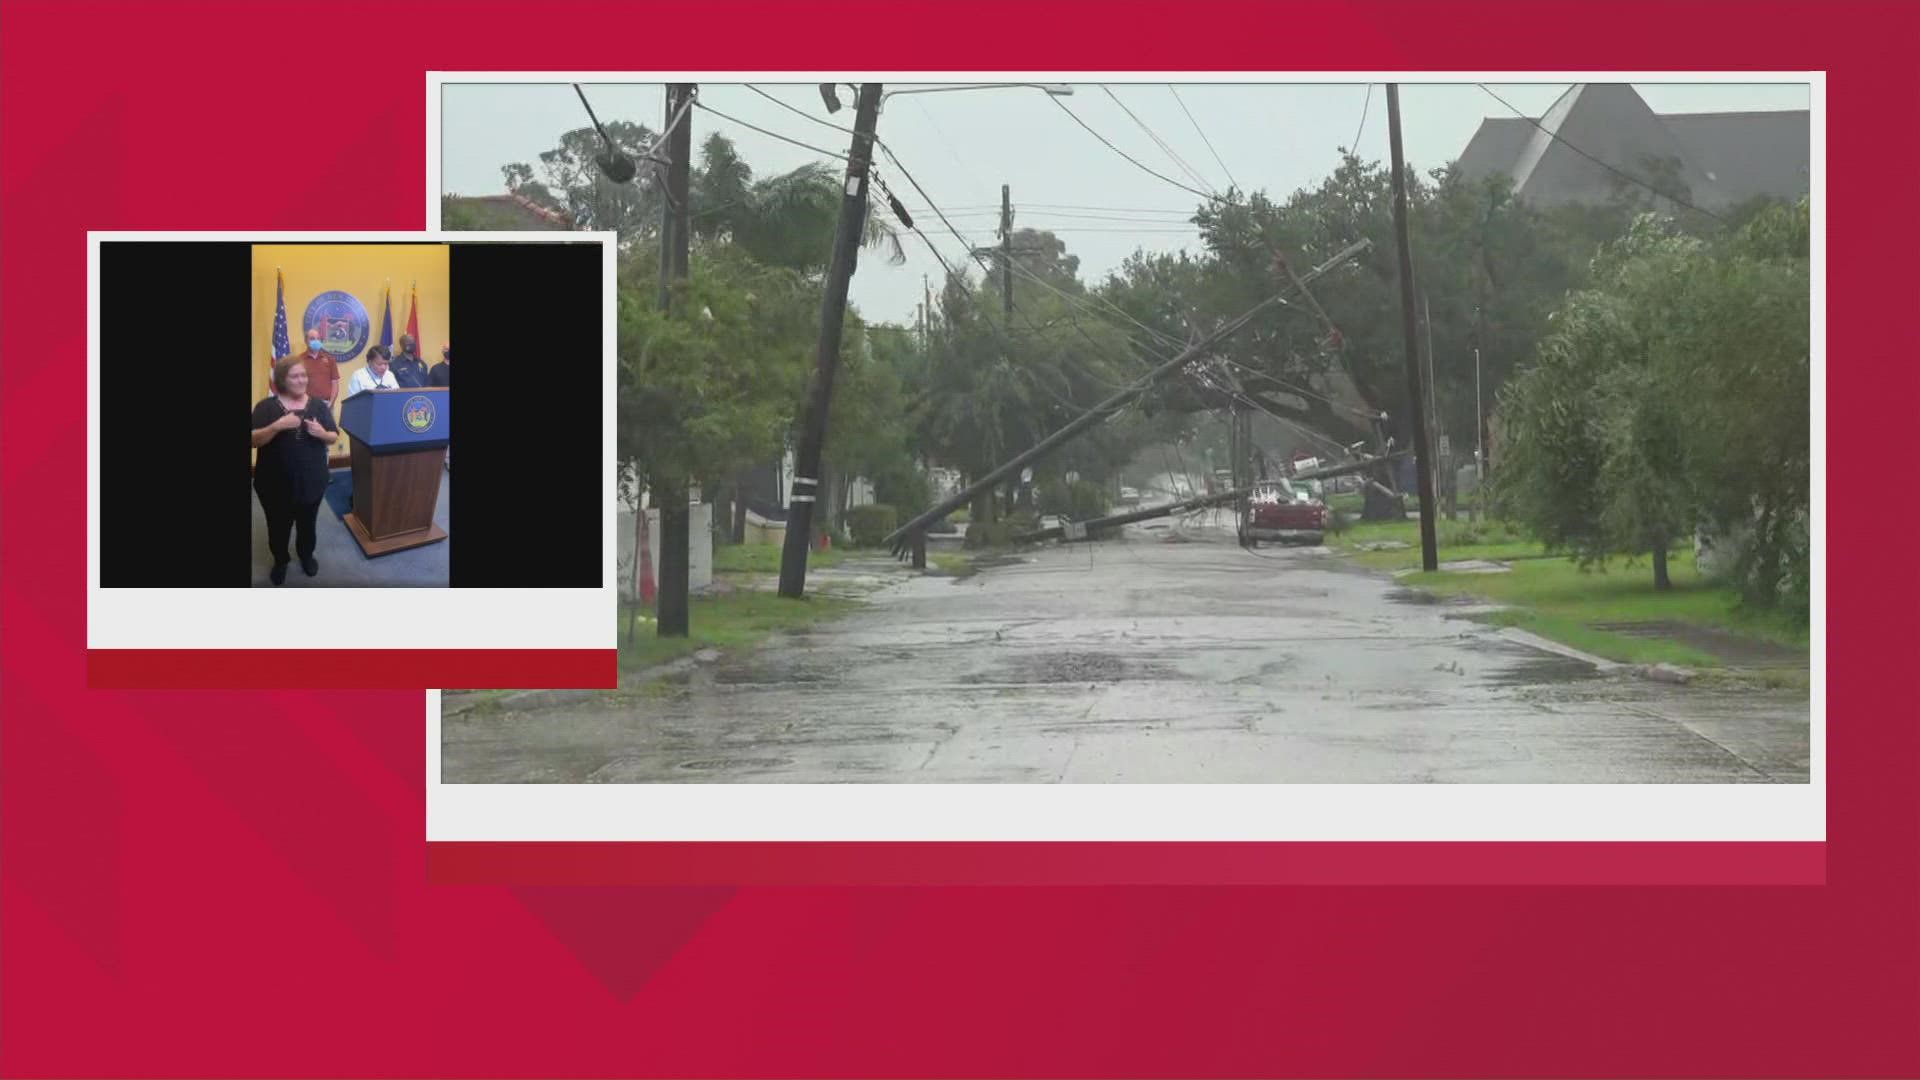 The mayor added she was "cautiously optimistic" about Entergy's timeline to restore power to certain New Orleans neighborhoods.